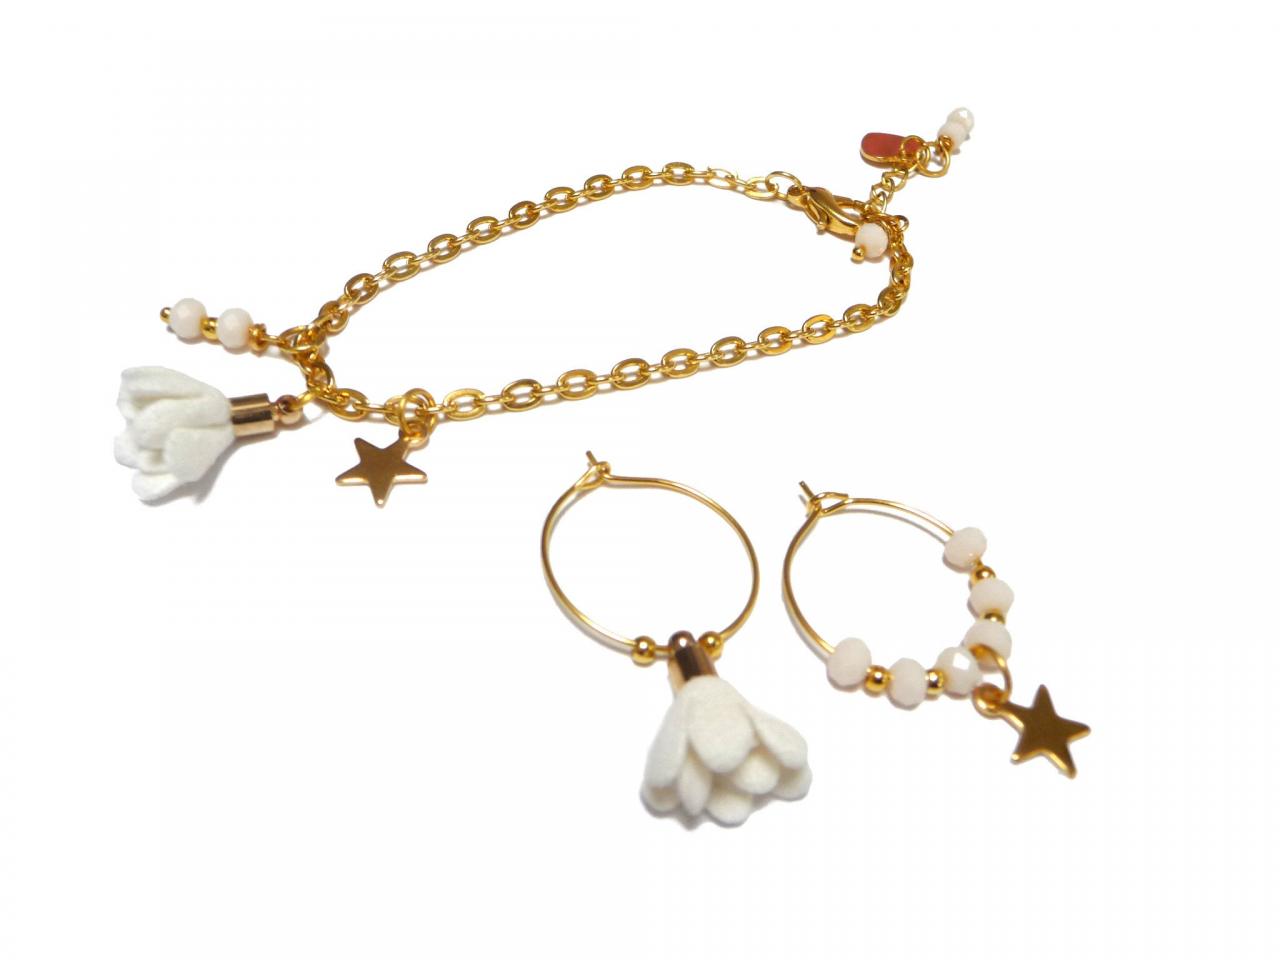 Gold And White Earrings And Bracelet Set - Mismatched Hoop Earrings With Star And Flower Charms - Personalized Gift For Friend